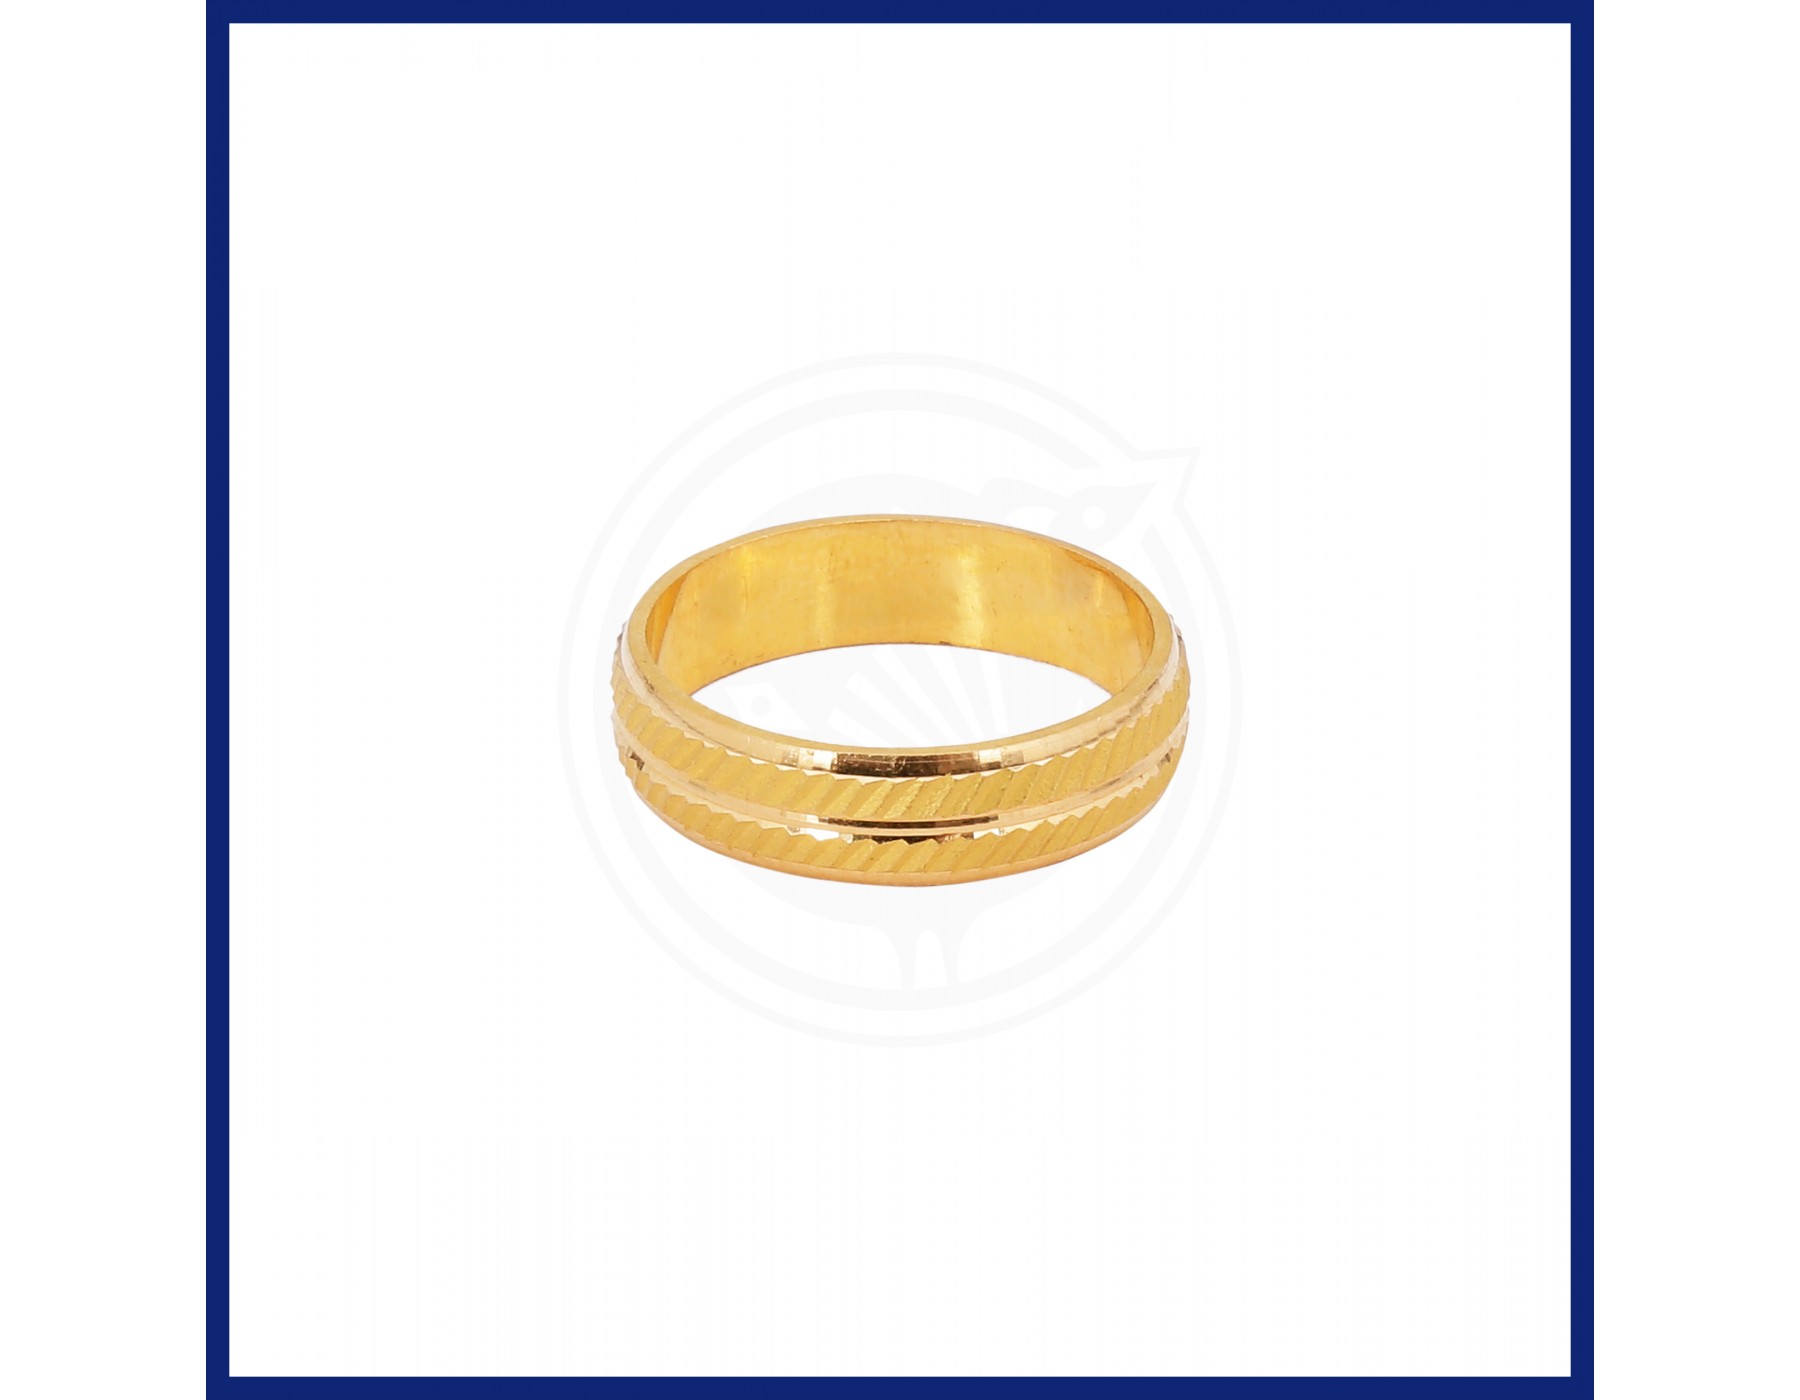 Alice' Gold Ring - 'Two Worlds' Alice in Wonderland Collection